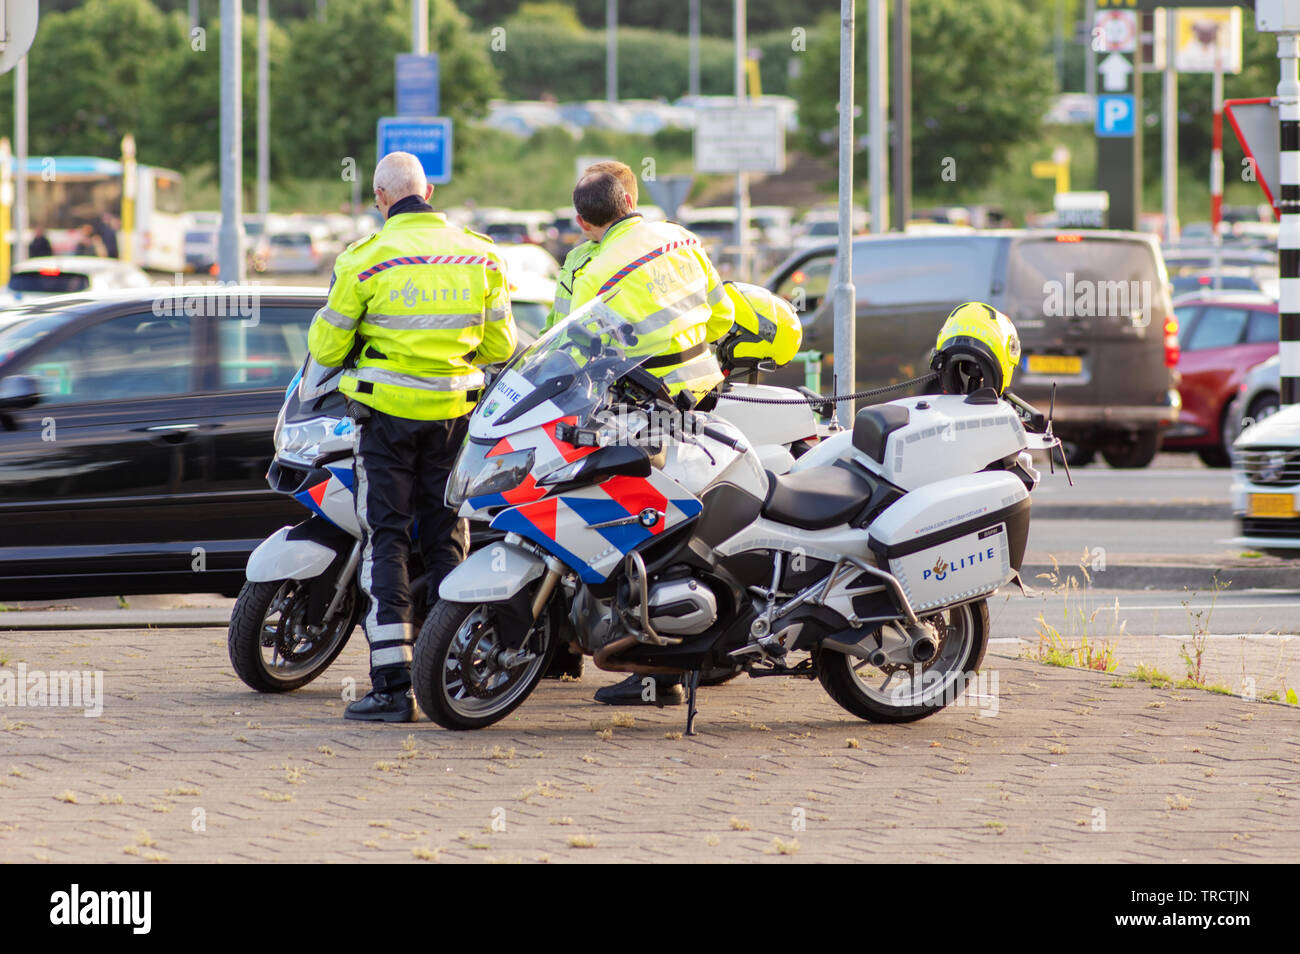 Arnhem, Netherlands - May 28, 2019: Dutch police officers are standing by their bikes at the Gelredome stadium Stock Photo